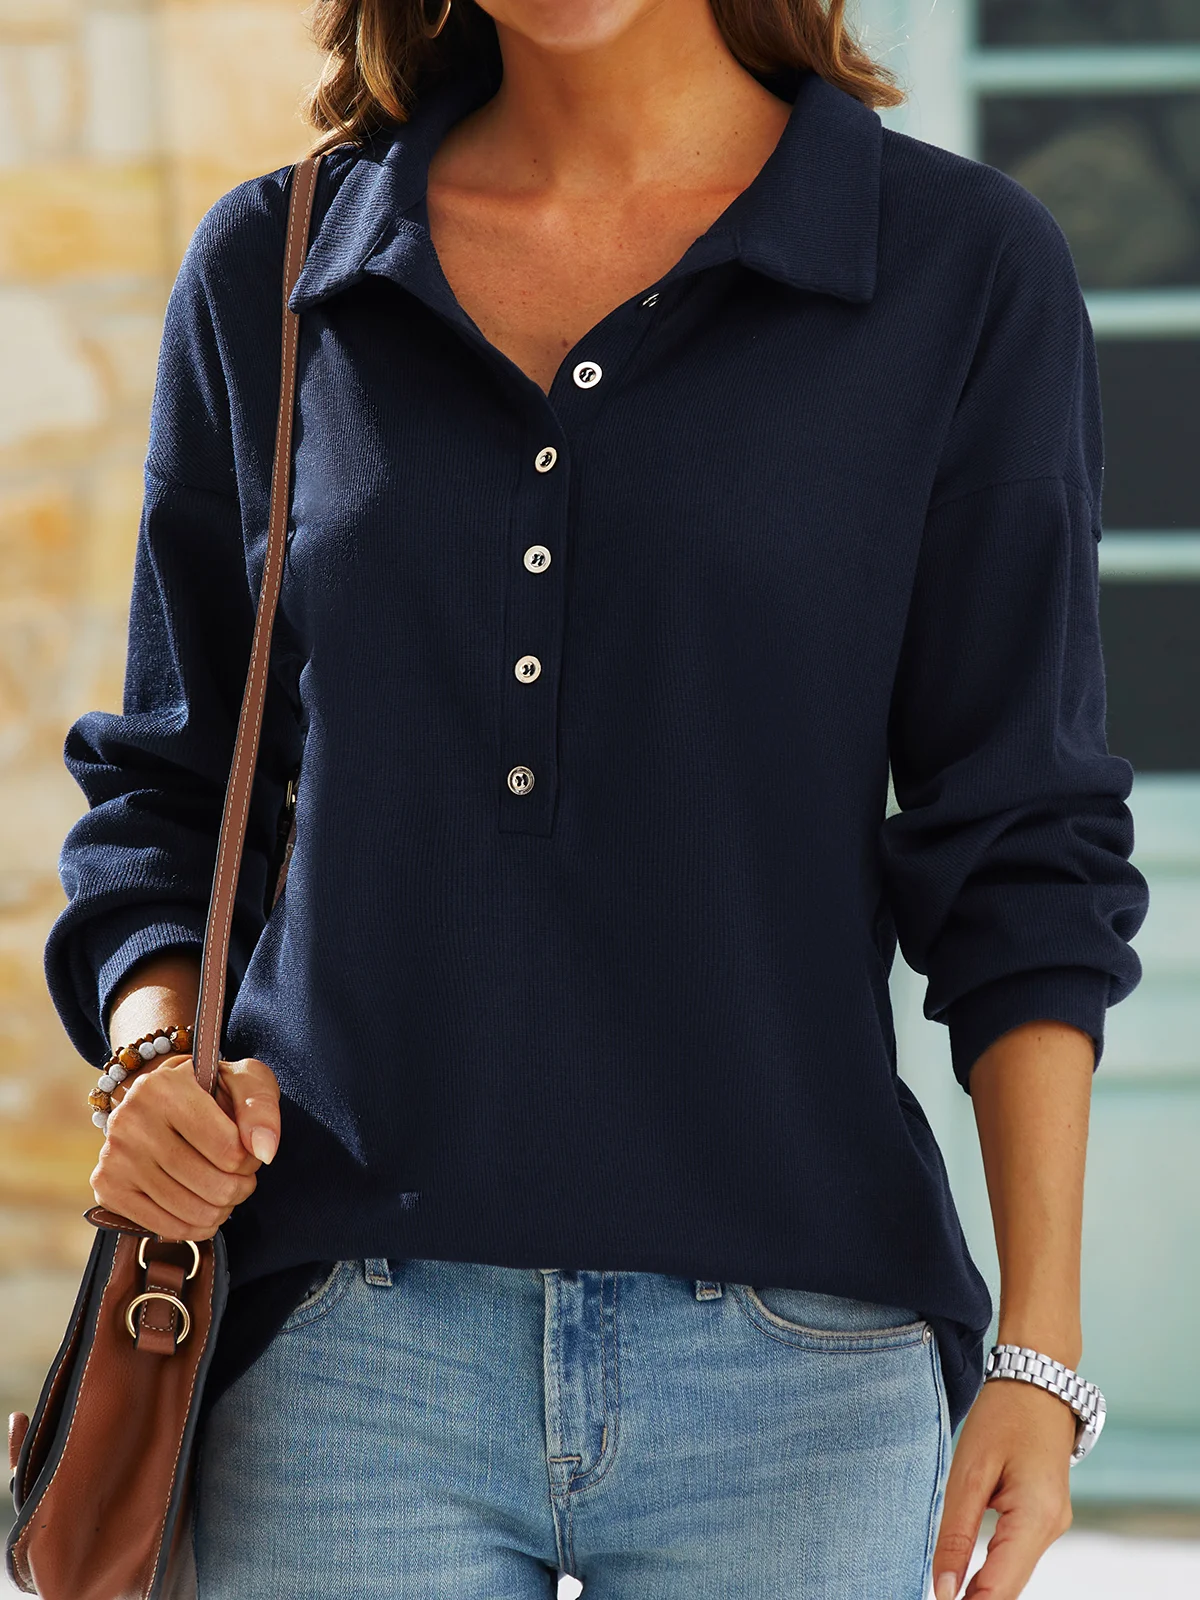 Navy Button Front Long Sleeve Henley Top